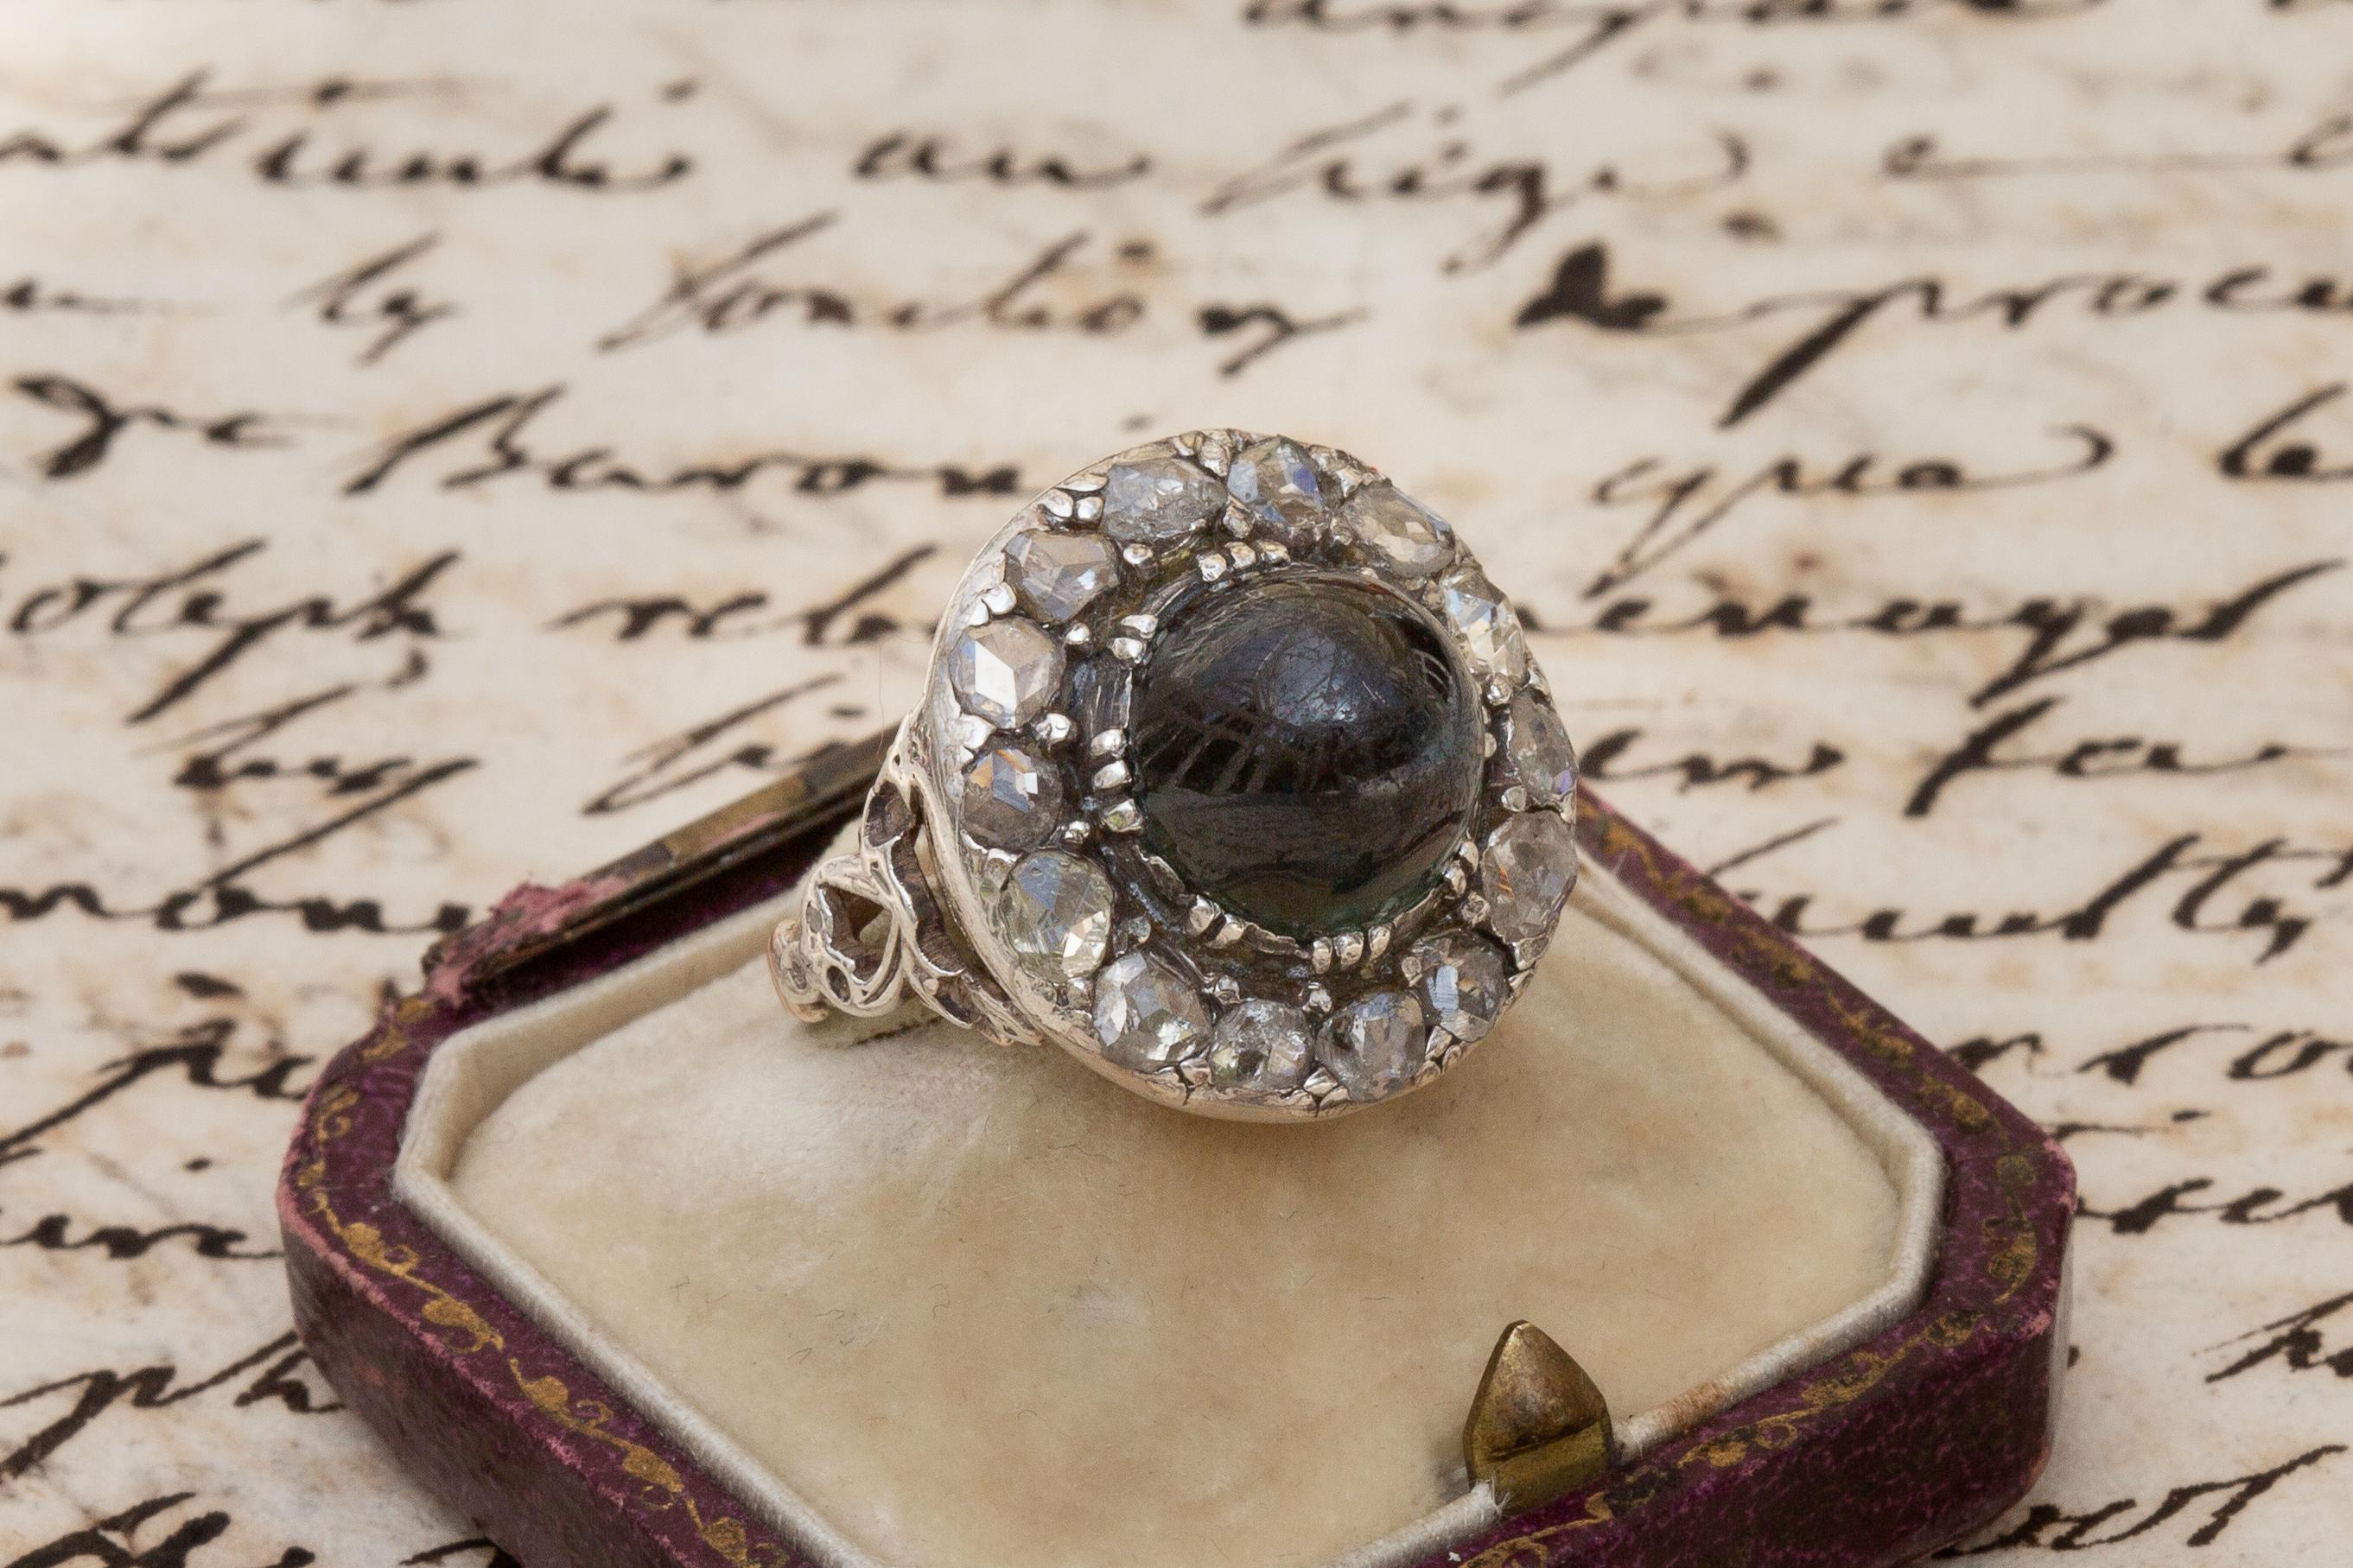 This unusual cluster ring dates to the the early 19th century, circa 1810. A rare and usual example, this Georgian era cluster is set with a high-domed bi-colour sapphire which displays a predominant deep chromium green colour with areas of teal